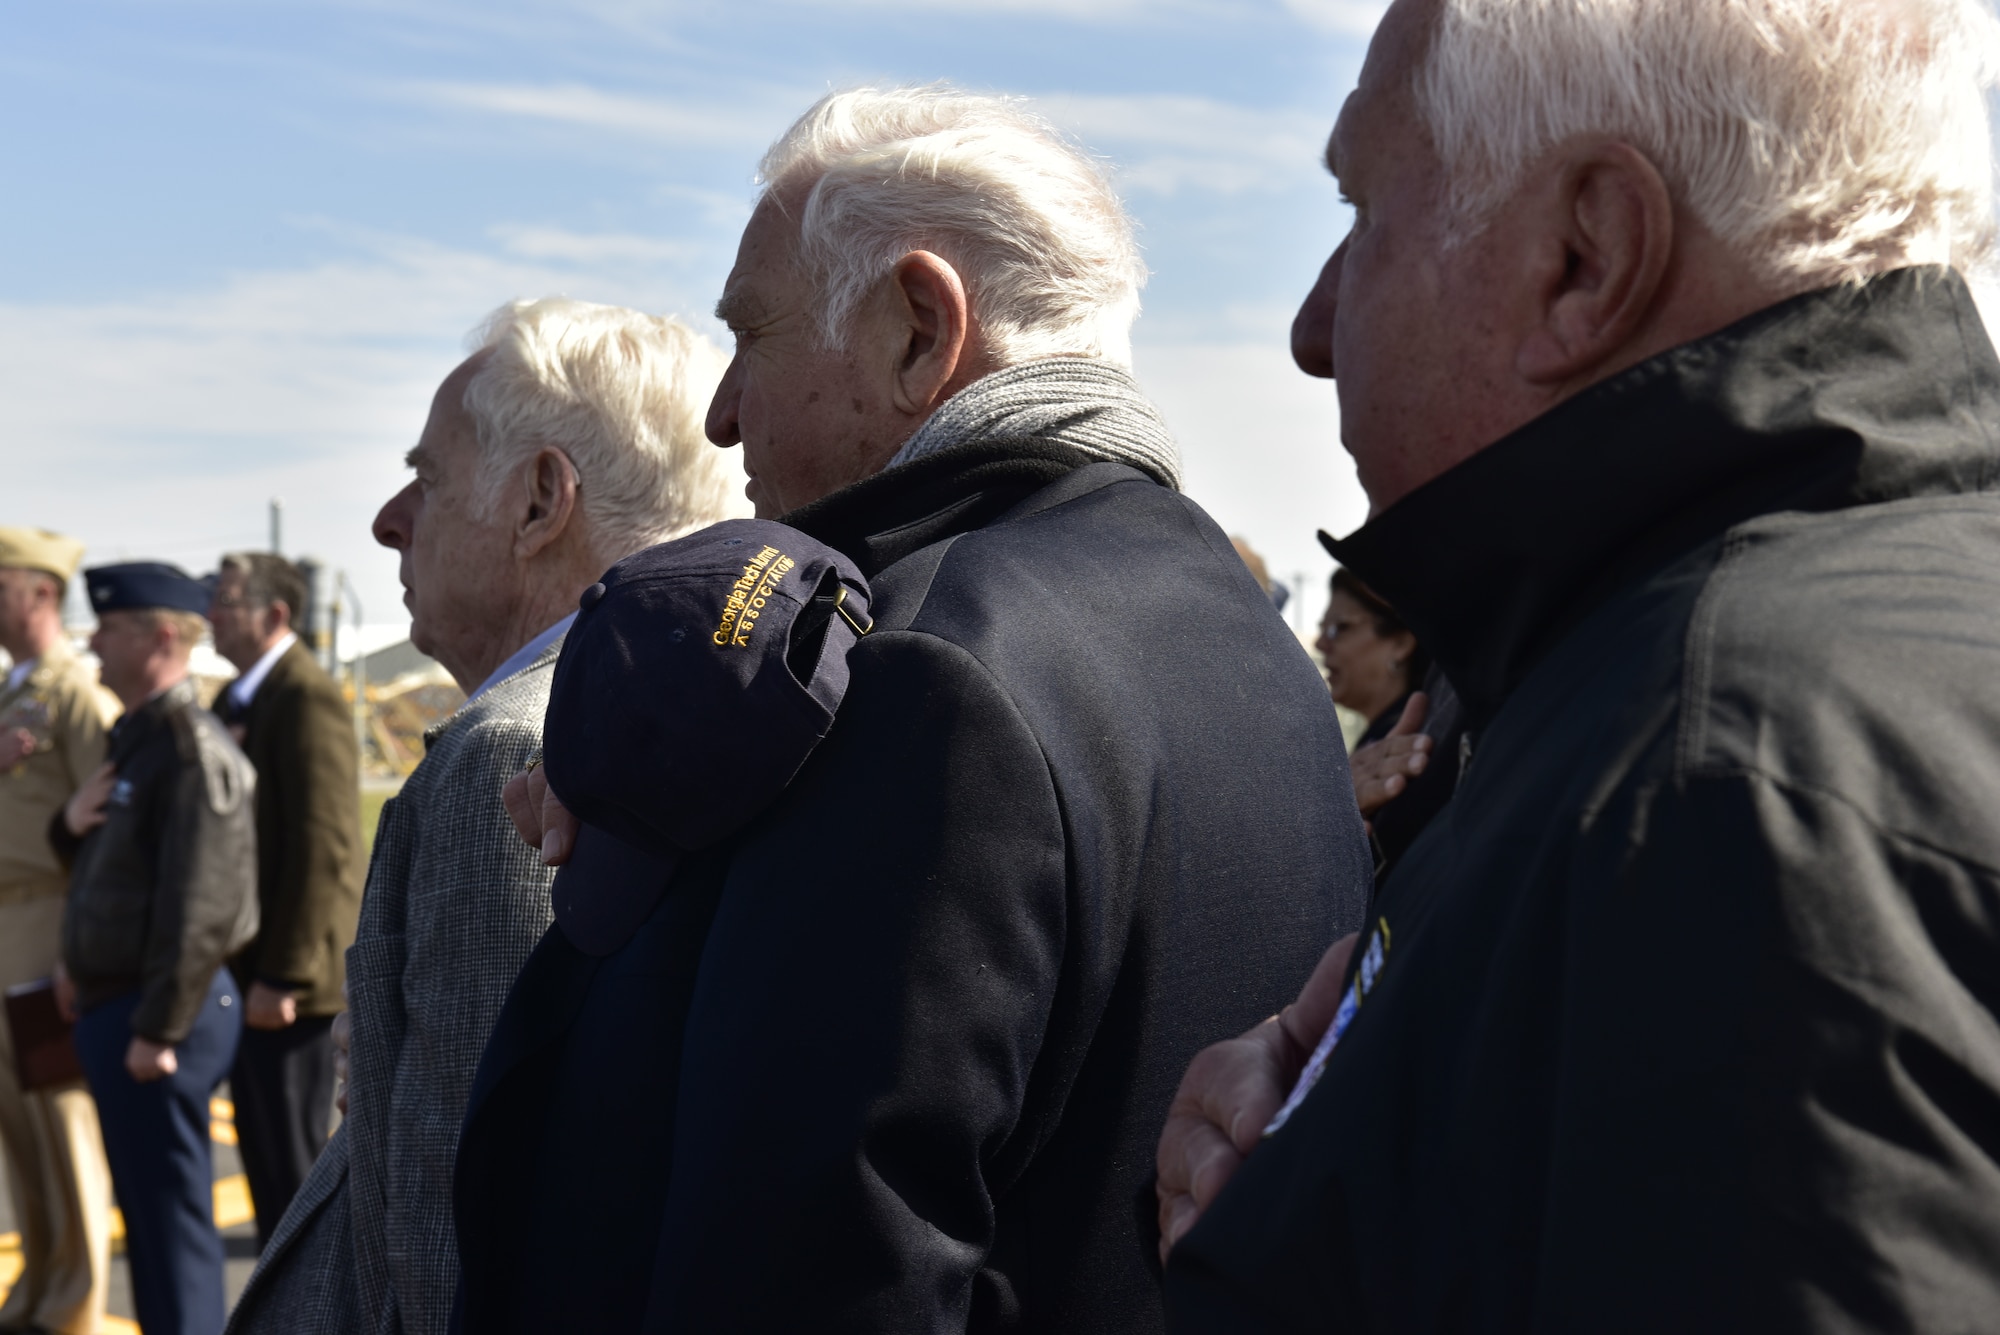 Members of the Great American Defense Community render honors during the playing of the national anthem at the beginning of an award ceremony with the Great American Defense Community at Tyndall Air Force Base, Fla., Feb. 13, 2019. Tyndall was awarded the Great American Defense Community Award for 2019 with a commemorative logo painted on the water tower to represent Bay County’s accomplishments. Bay County is one of five communities across the country to be named a Great American Defense Community in 2019.  (U.S. Air Force photo by Staff Sgt. Alexandre Montes)